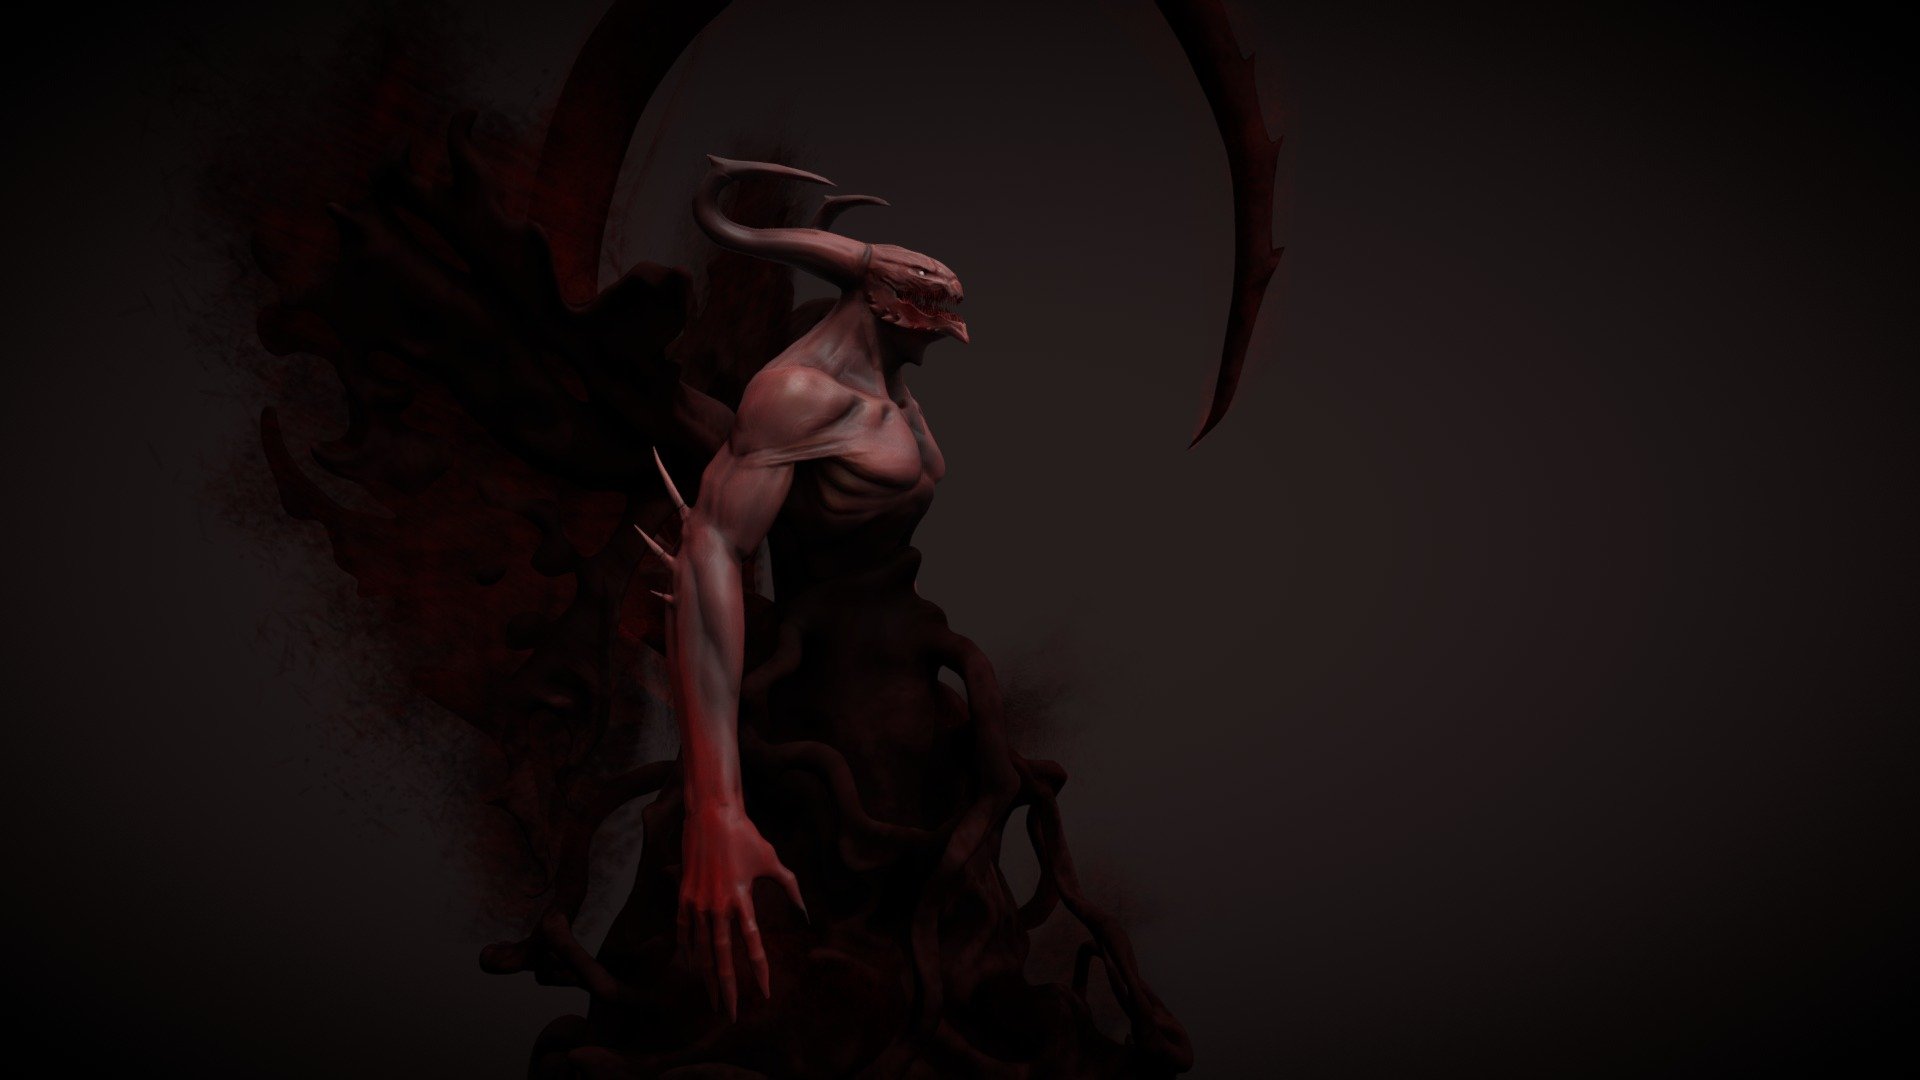 Decimated (Zbrush) the body to lower some poly count and make it load faster here, don't like how the wireframe looks though.

Original Art: https://www.deviantart.com/manzanedo/art/Agramon-692937926 - Demon - Agramon - 3D model by Sweney_Jara 3d model